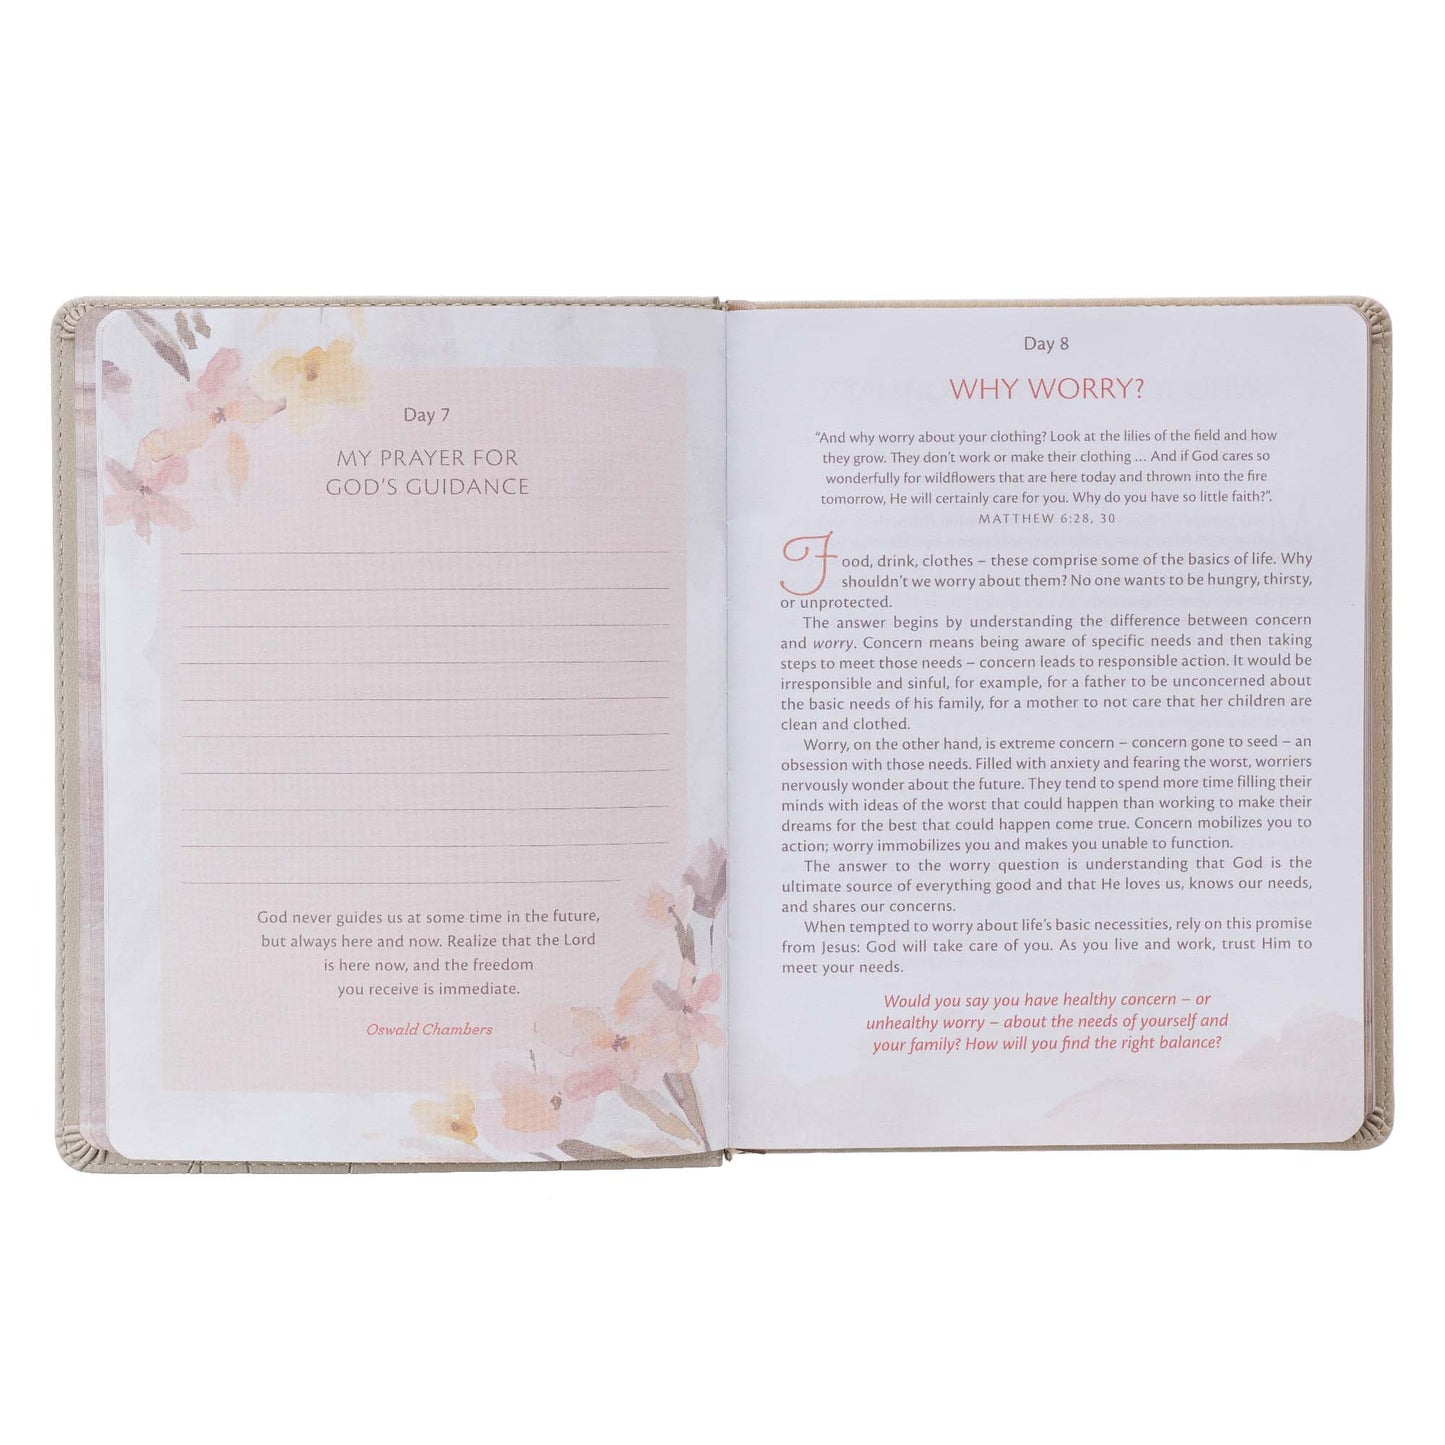 My Quiet Time Devotional Cappuccino Faux Leather Edition - The Christian Gift Company